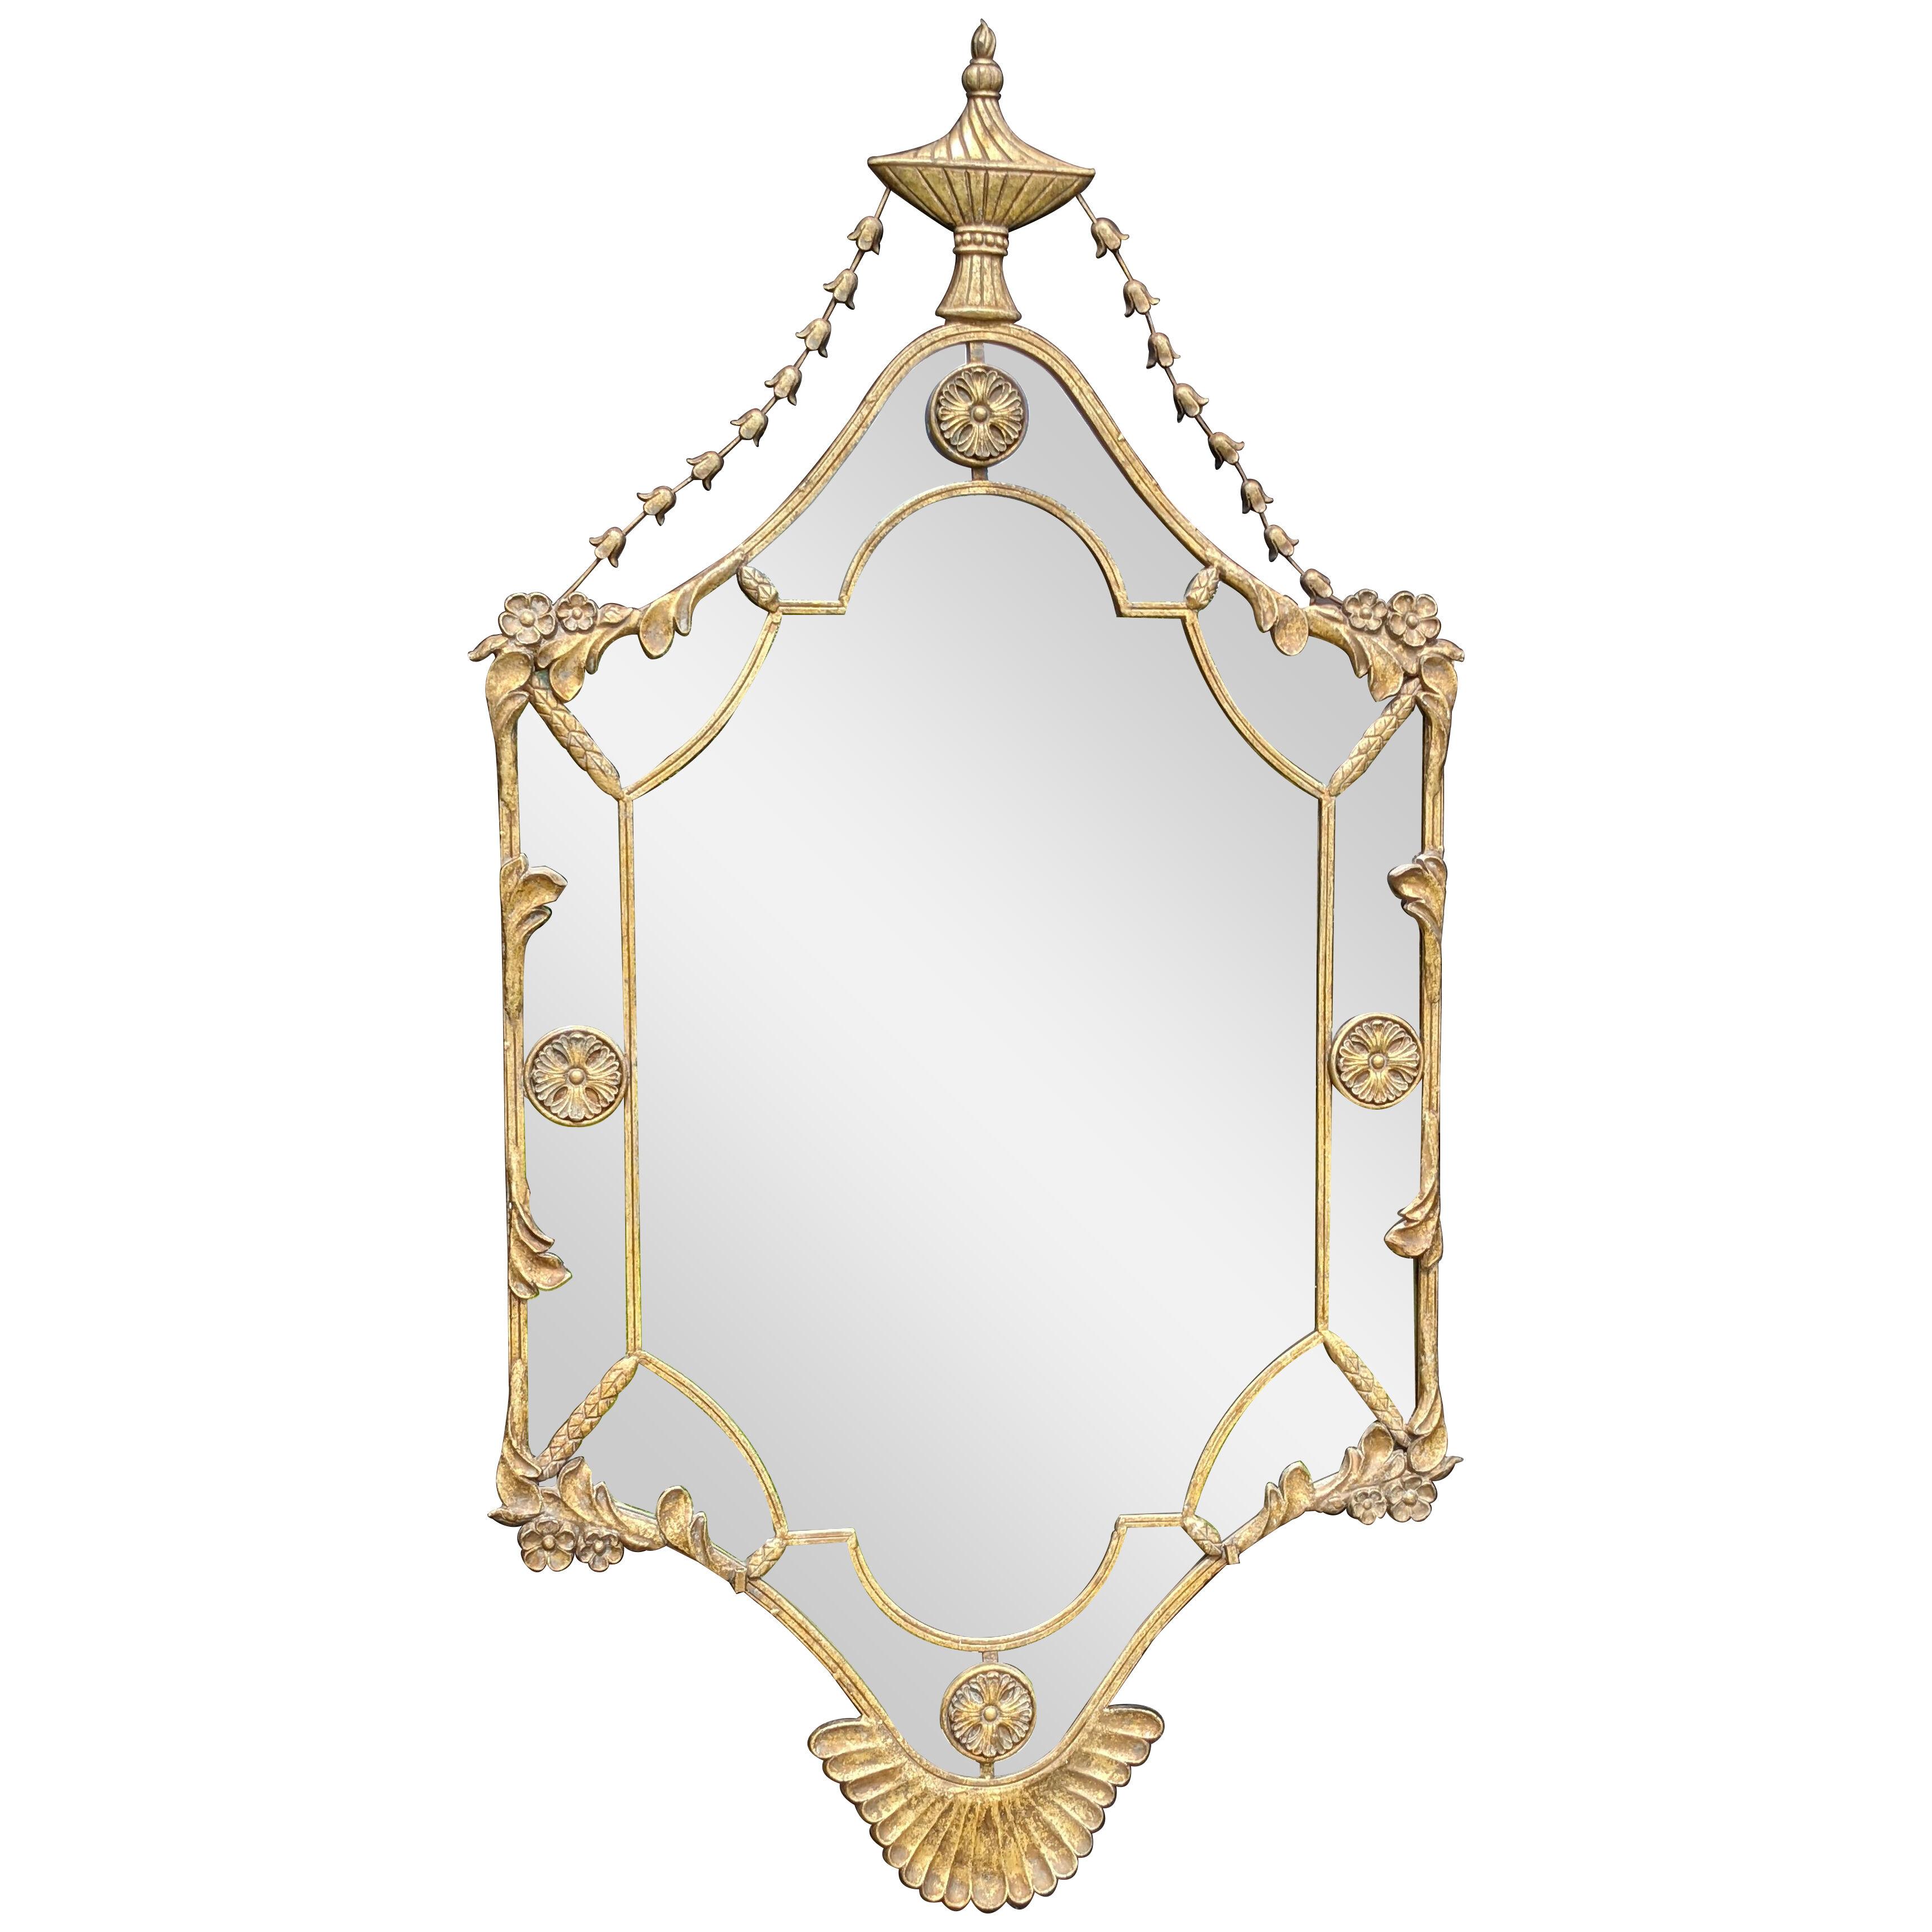 Early 20th Century Gilded Wall Mirror